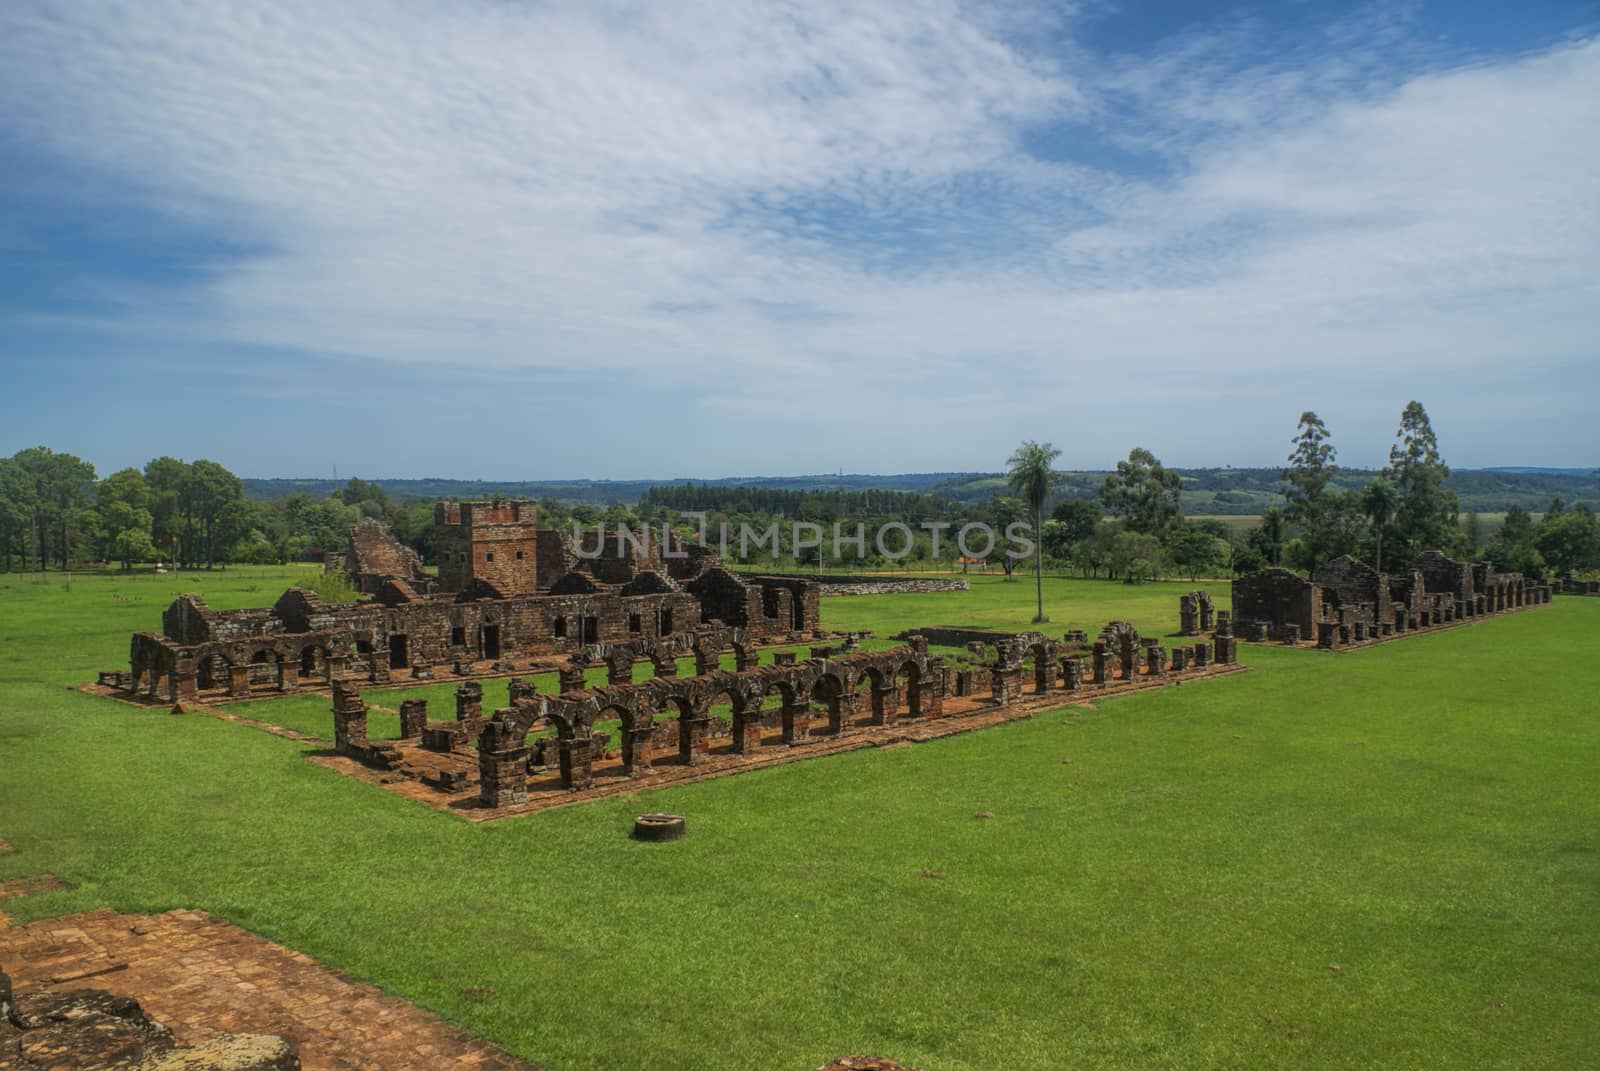 Encarnacion and jesuit ruins in Paraguay by MichalKnitl